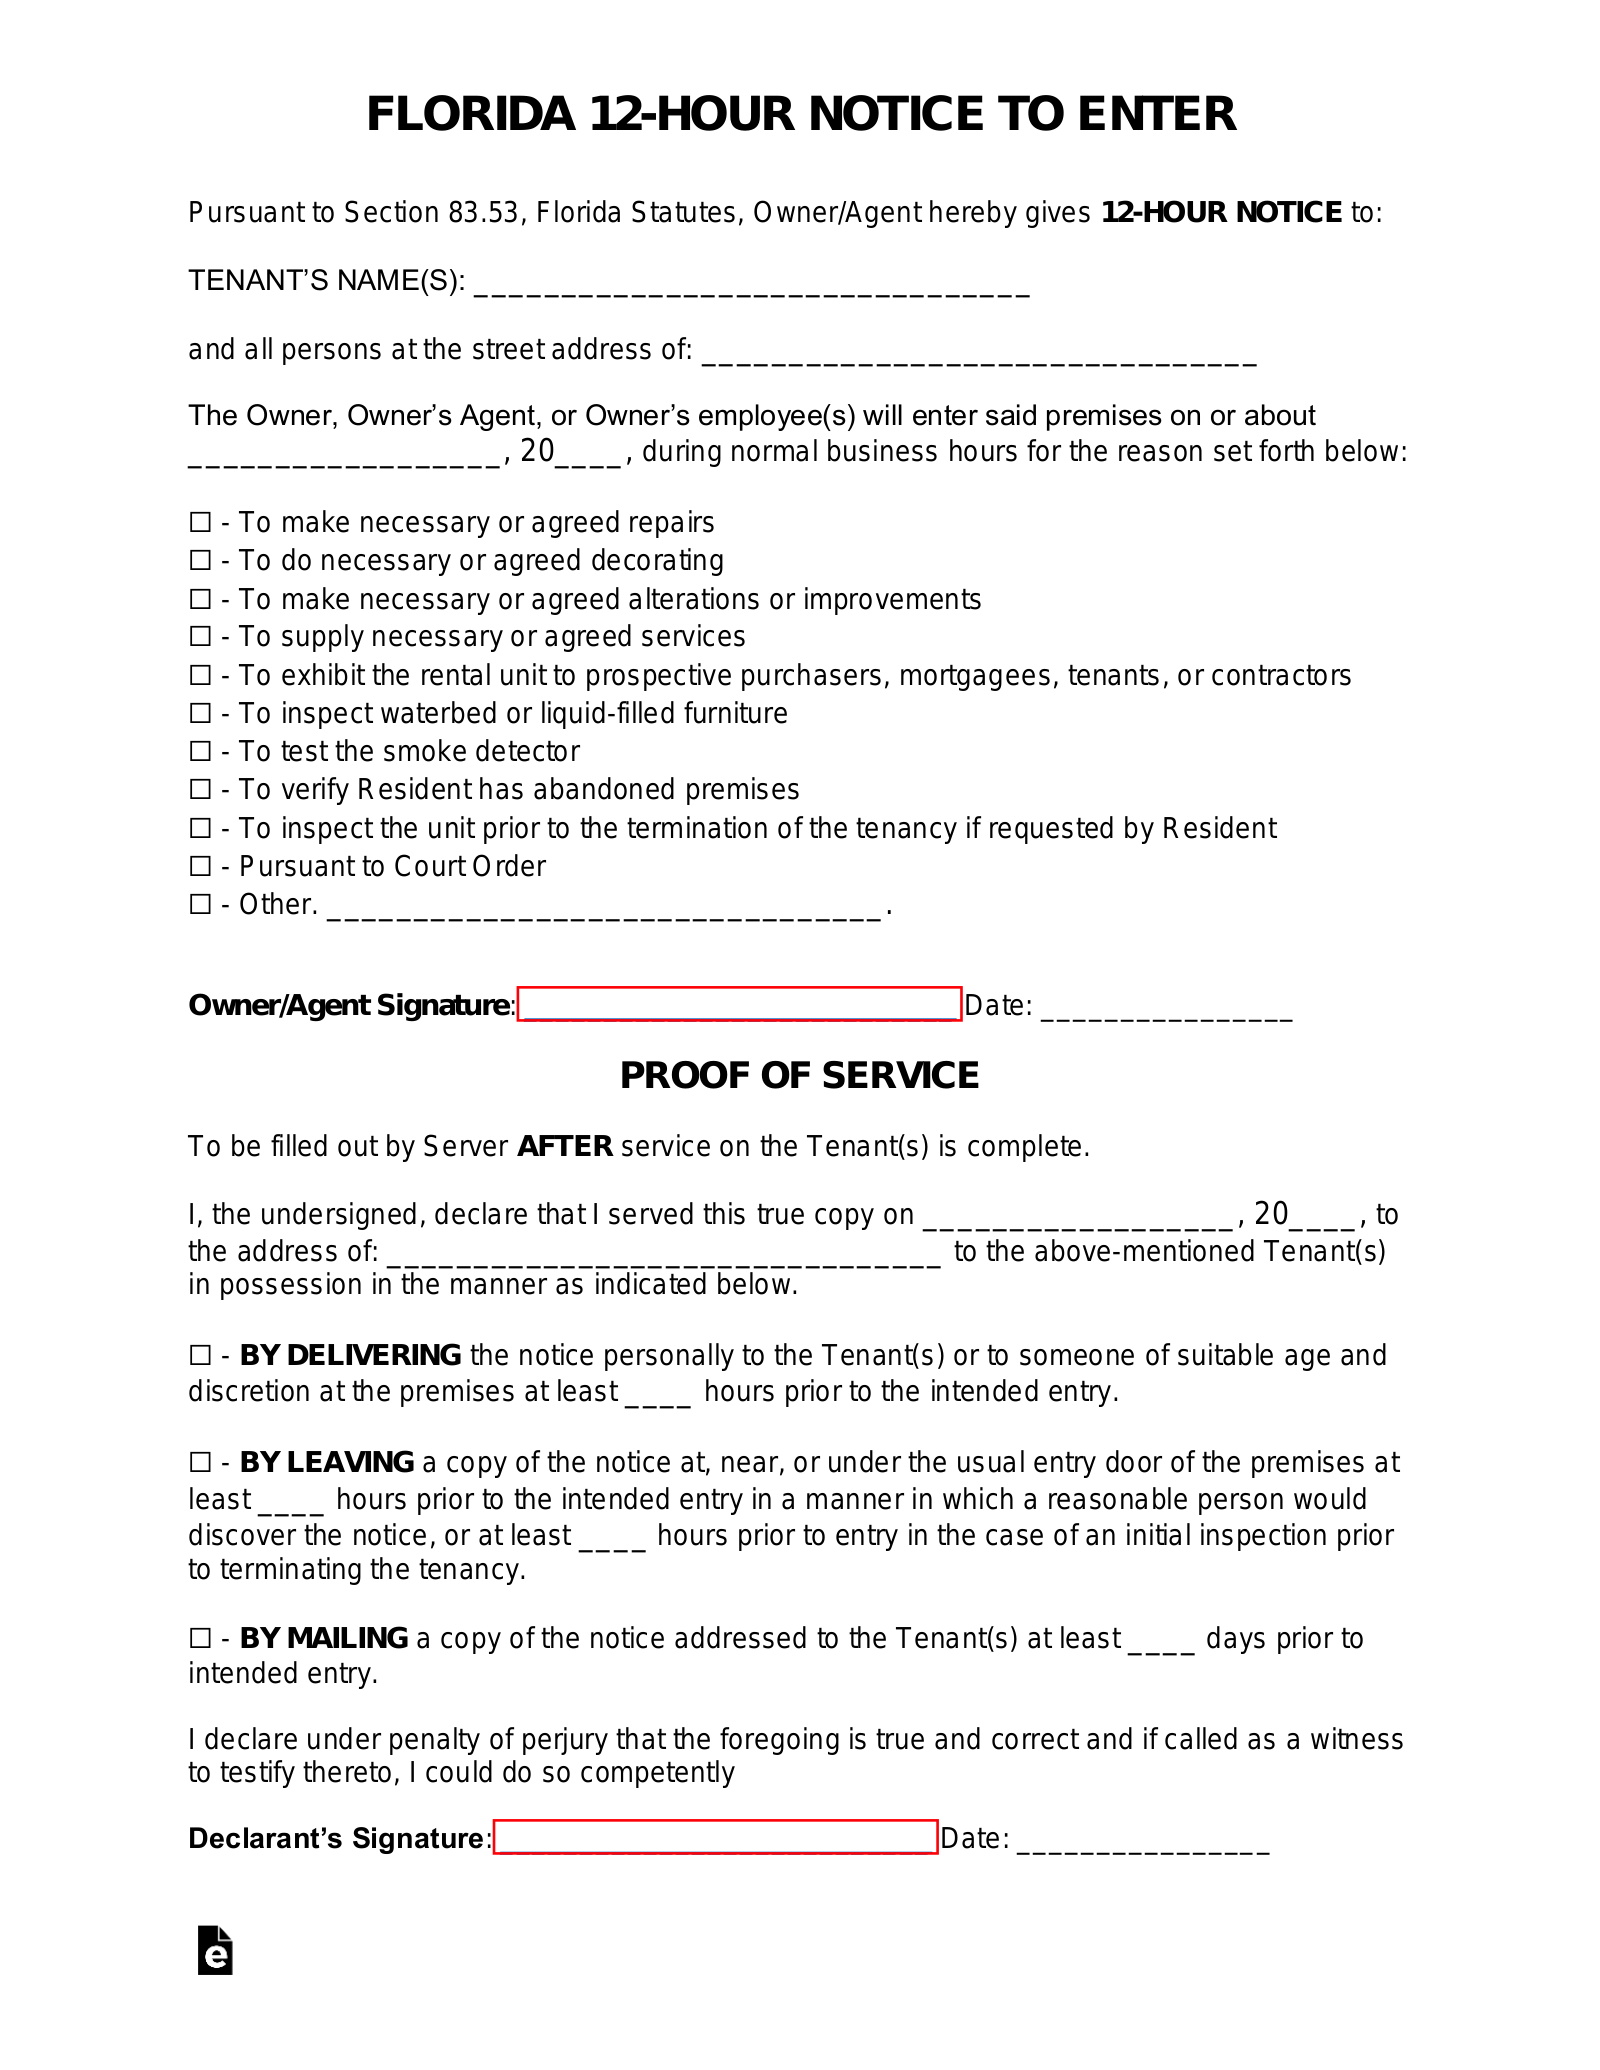 free-florida-12-hour-landlord-notice-to-enter-form-pdf-word-eforms